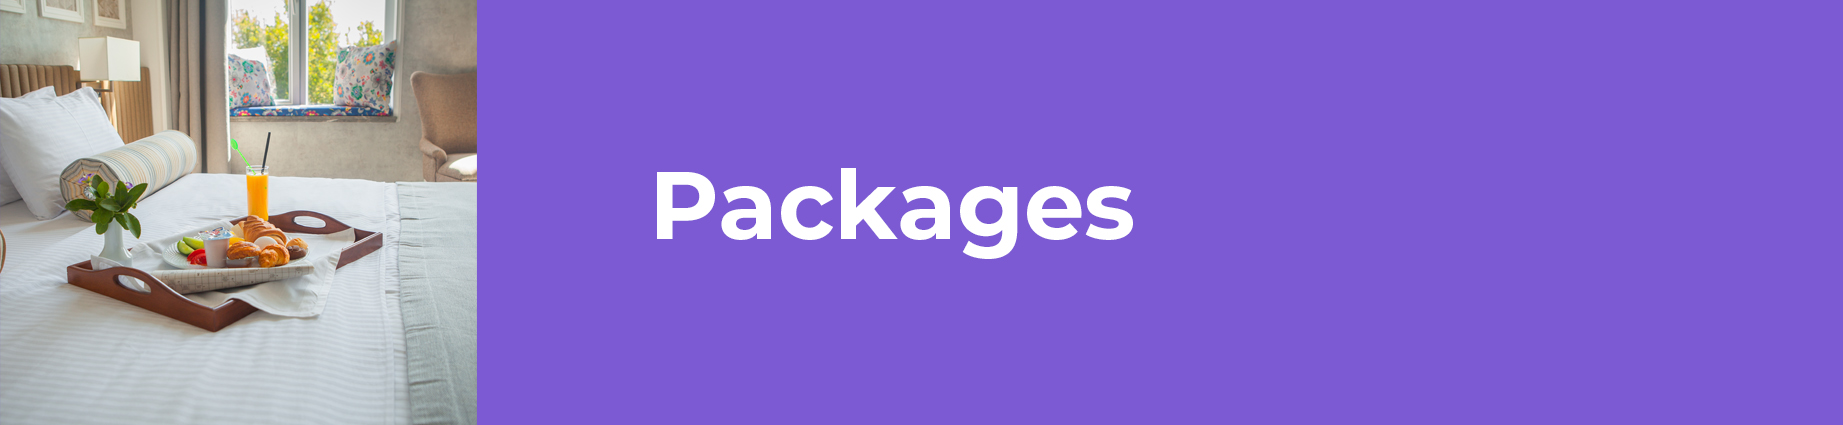 BE packages